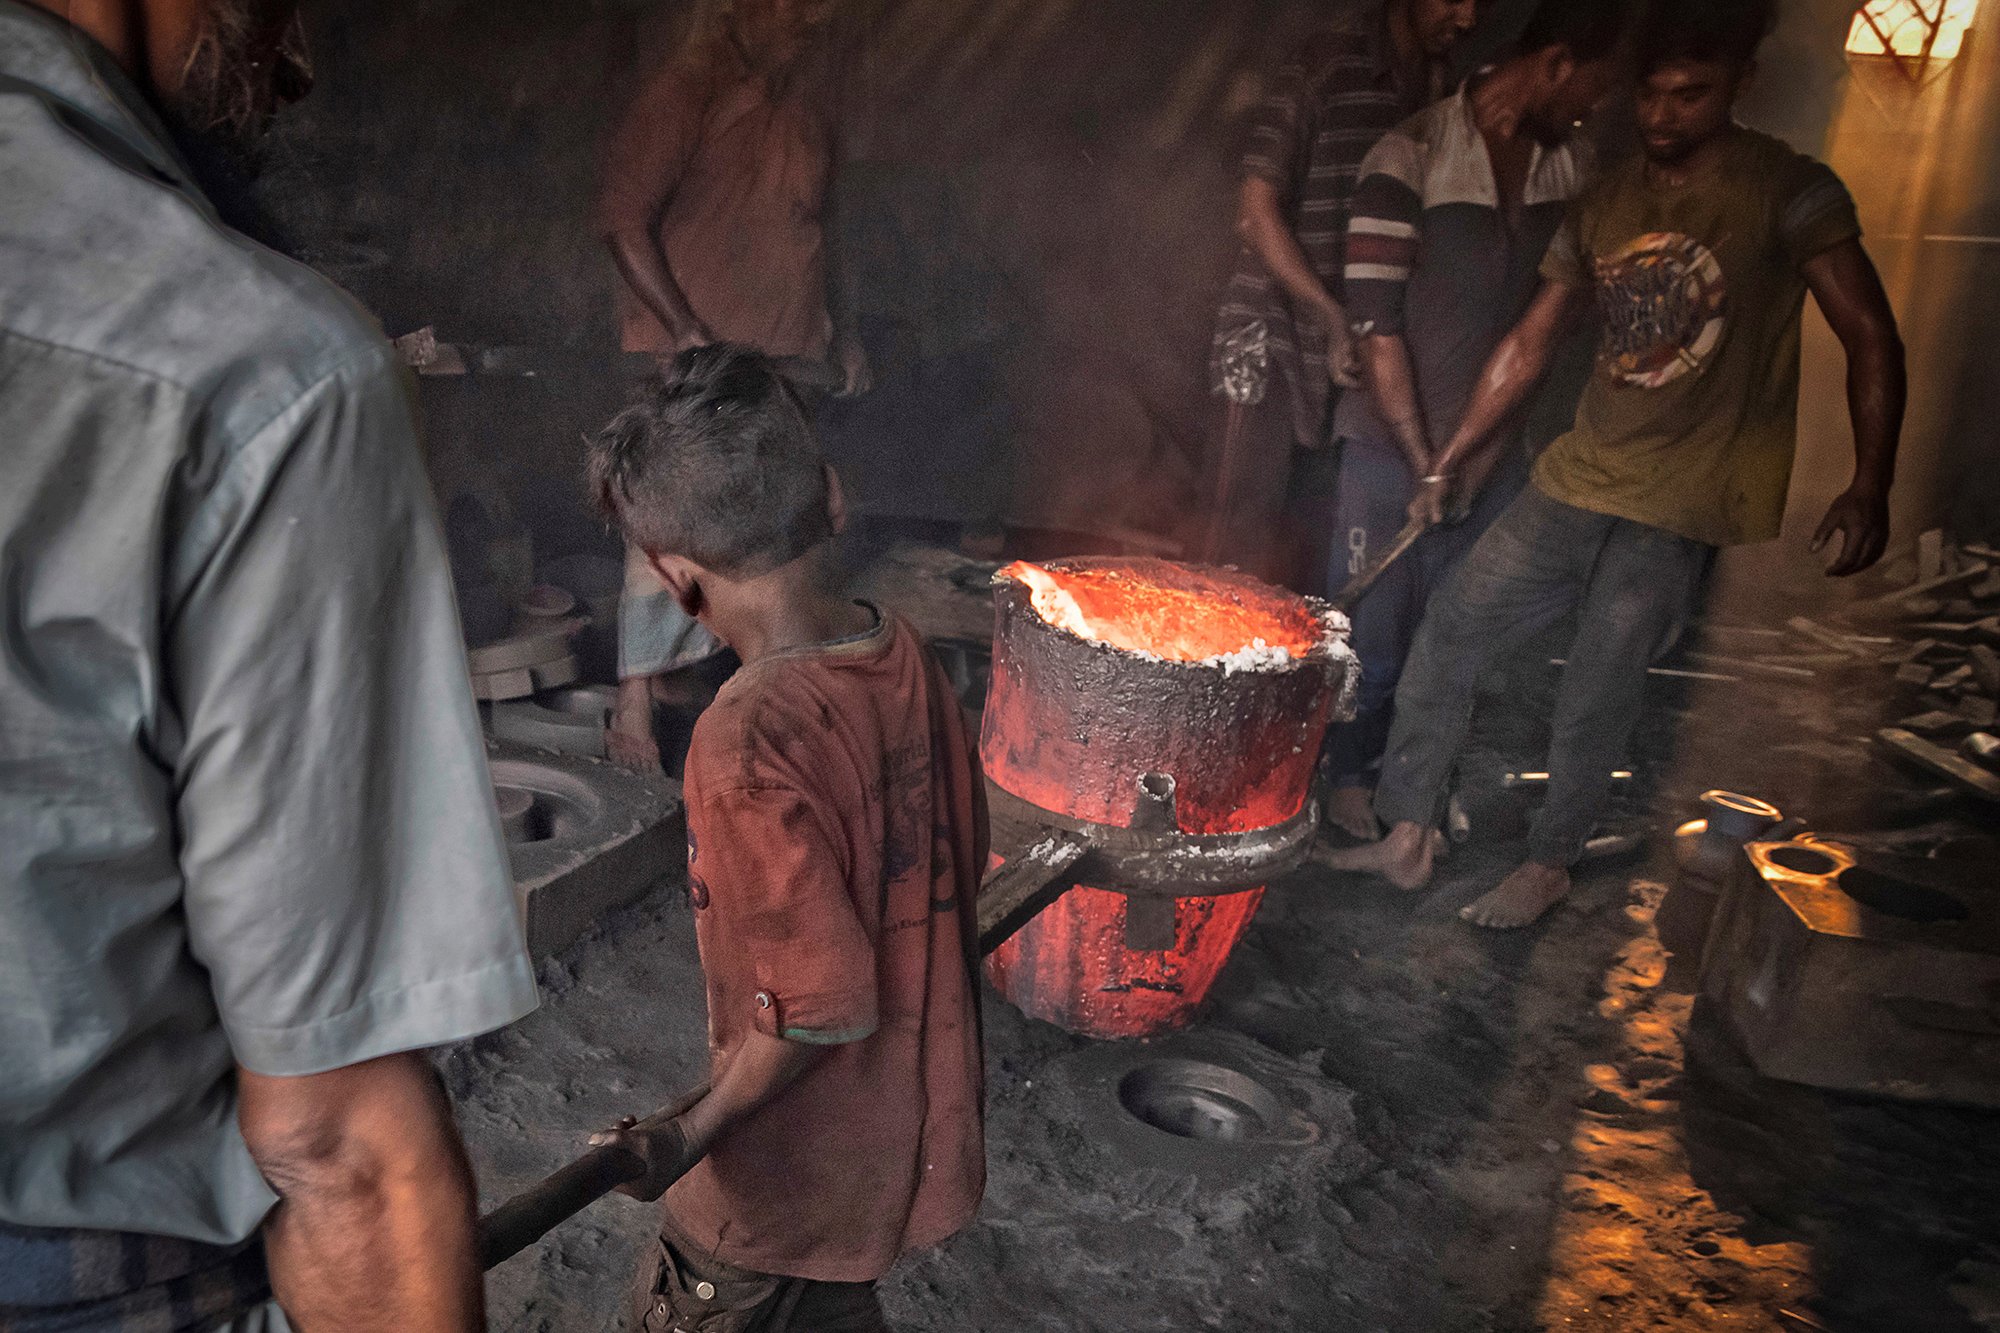 A chilld and few adults melt metal in hazardous working conditions in Dhaka, Bangladesh.